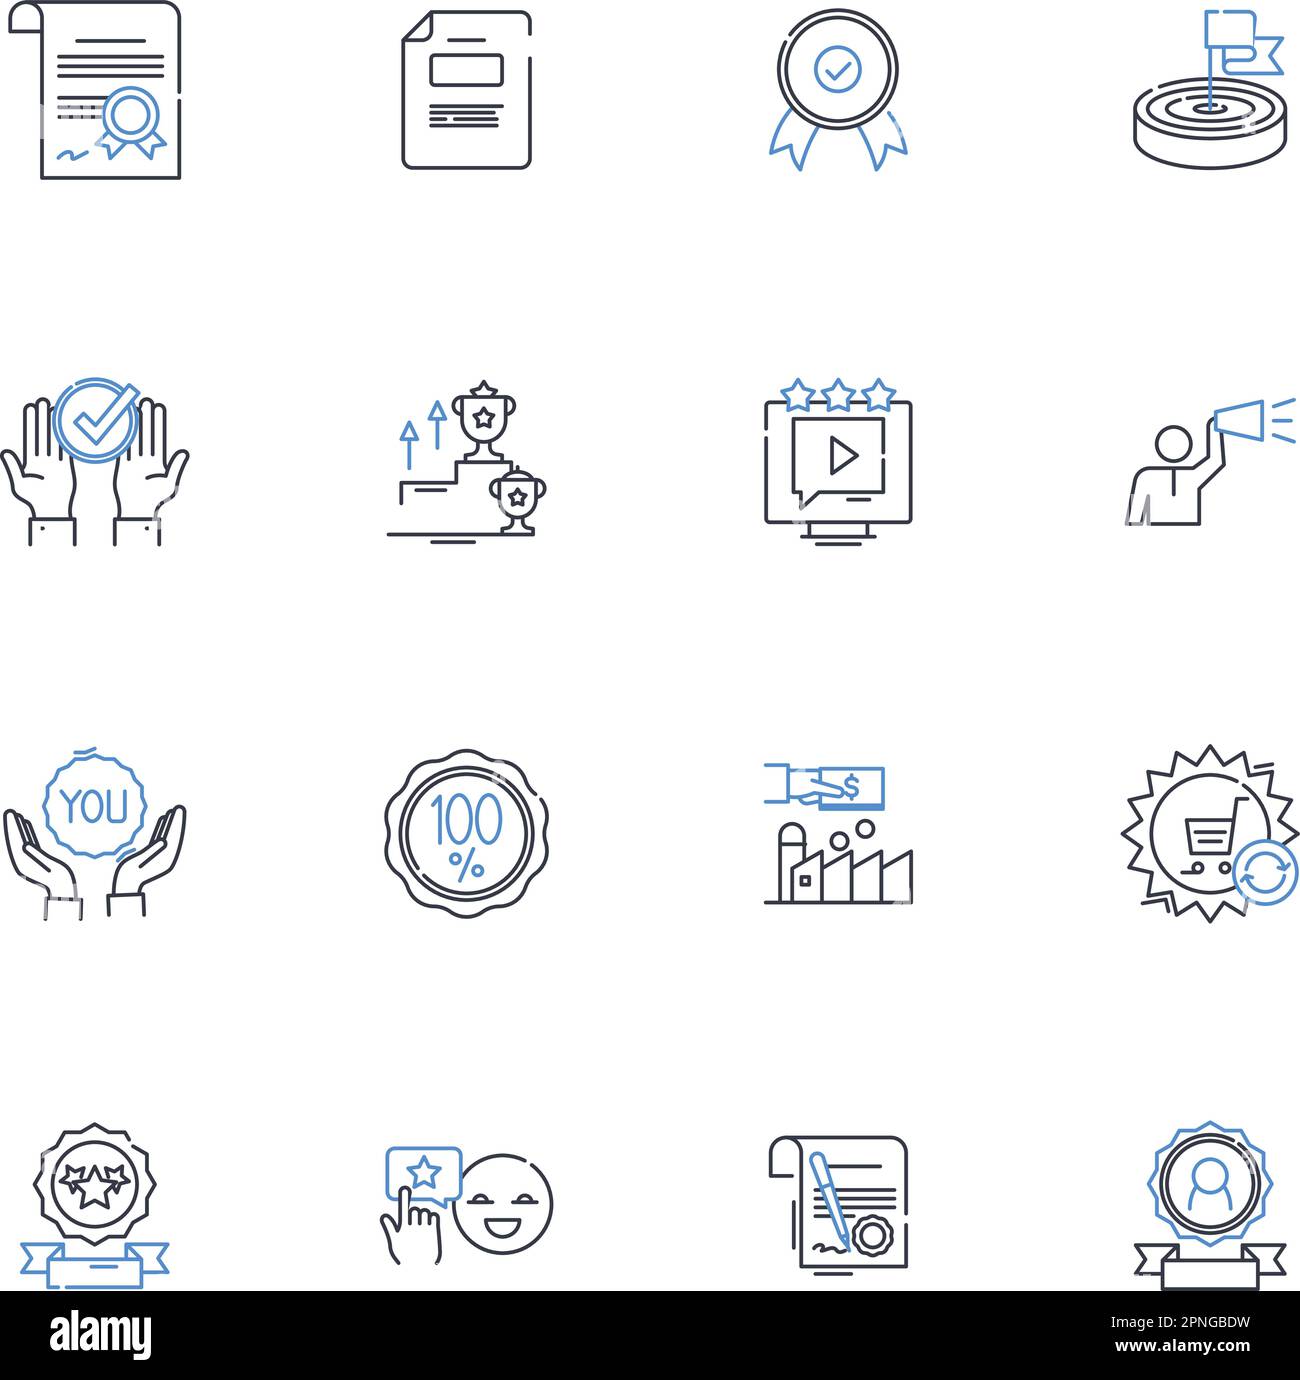 Citations line icons collection. Referencing, Sources, Bibliography, Footnotes, Endnotes, Citing, Documentation vector and linear illustration Stock Vector